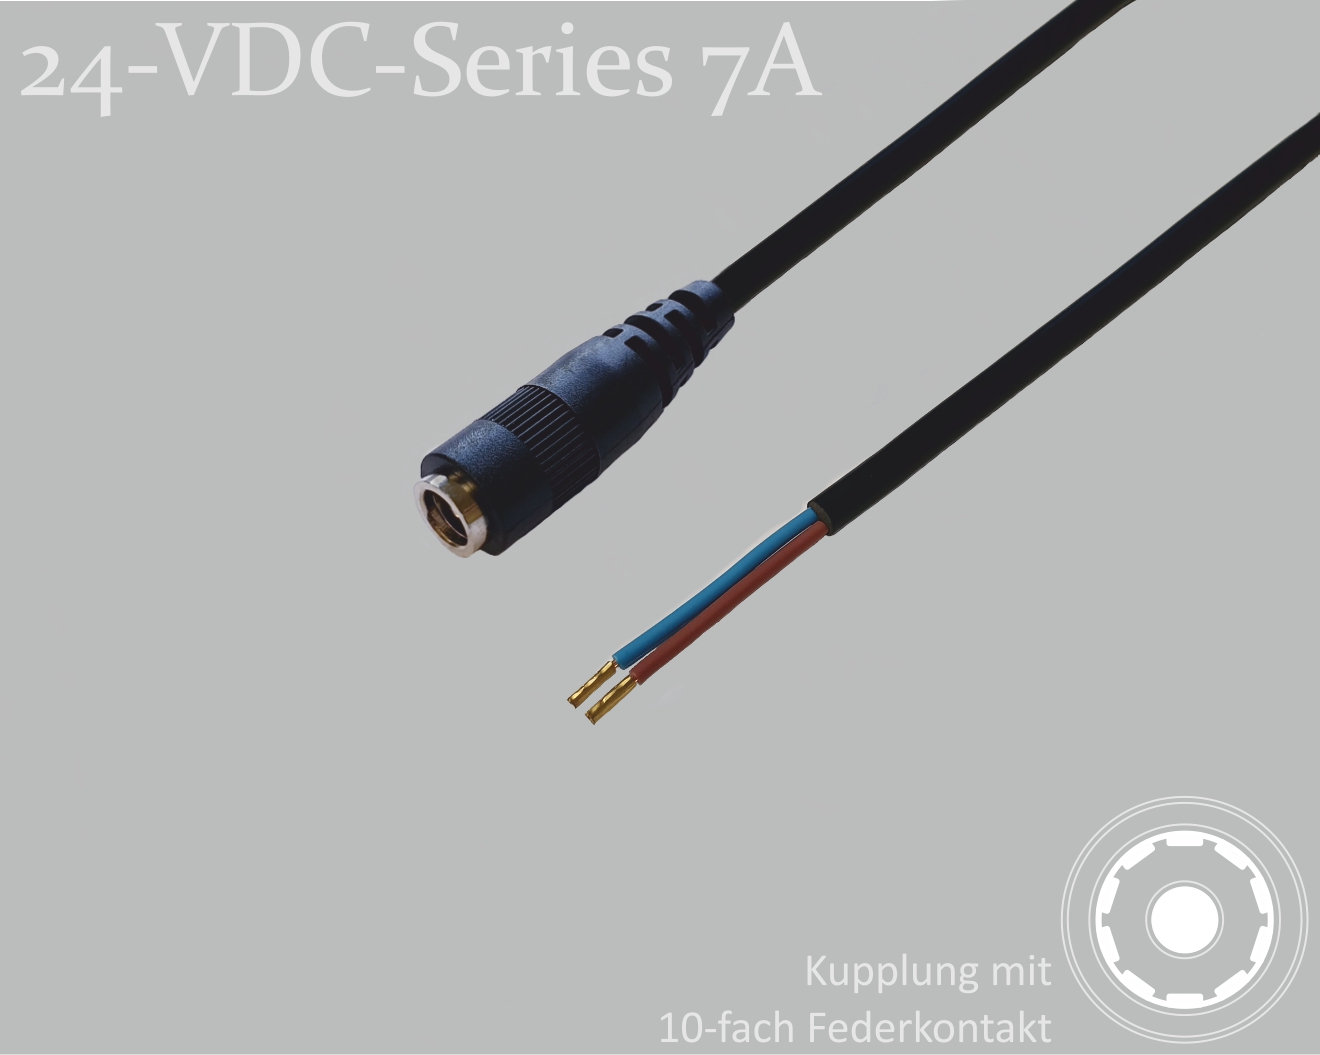 24-VDC-Series 7A, DC connection cable, DC coupling with 10-spring contact 2.1x5.5mm, round cable 2x0.50mm², black, wire end sleeves, 0.75m